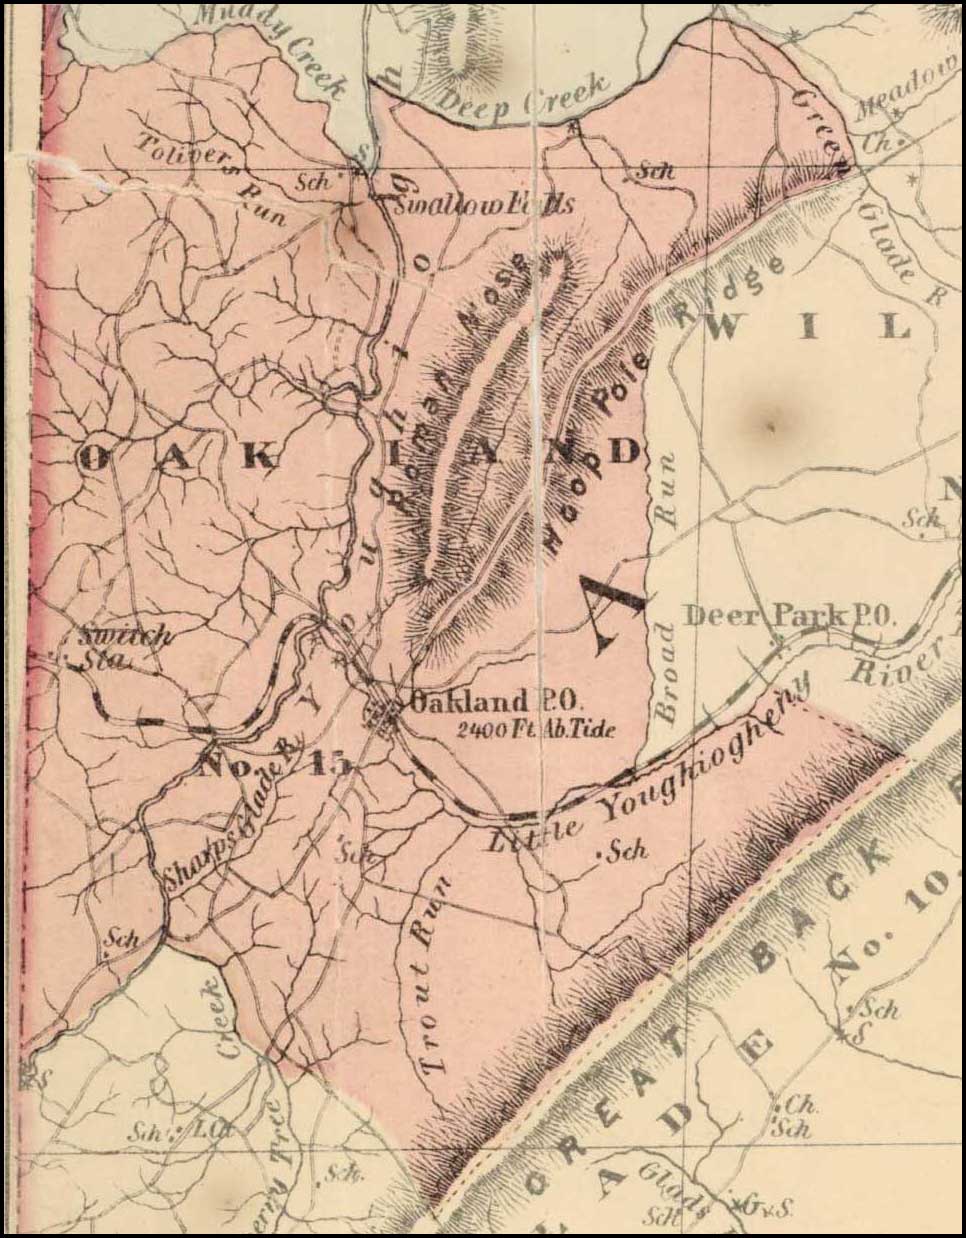 Simon J. Martenet, Map of Allegany County, 1865, Huntingfield Collection MSA SC 1399-1-75